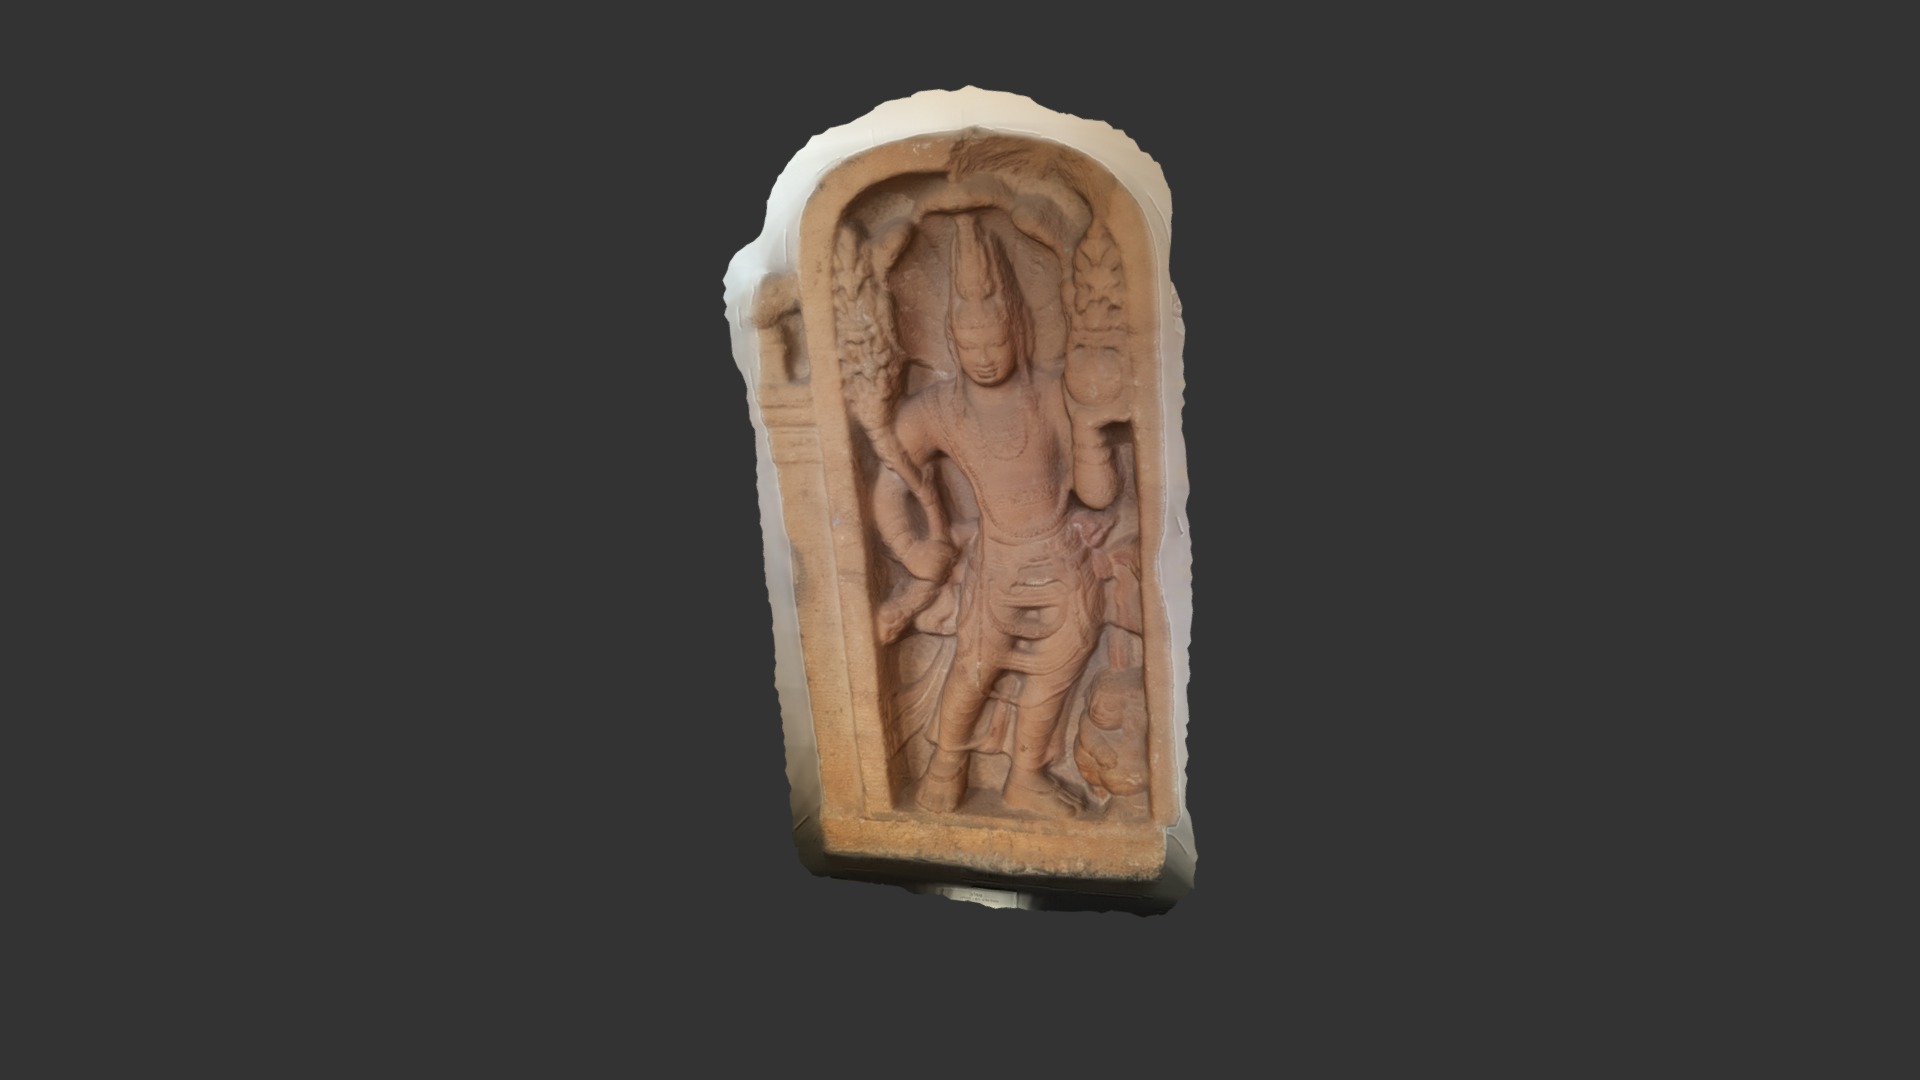 3D model Sri Lanka museum engraving - This is a 3D model of the Sri Lanka museum engraving. The 3D model is about a stone carving of a person.